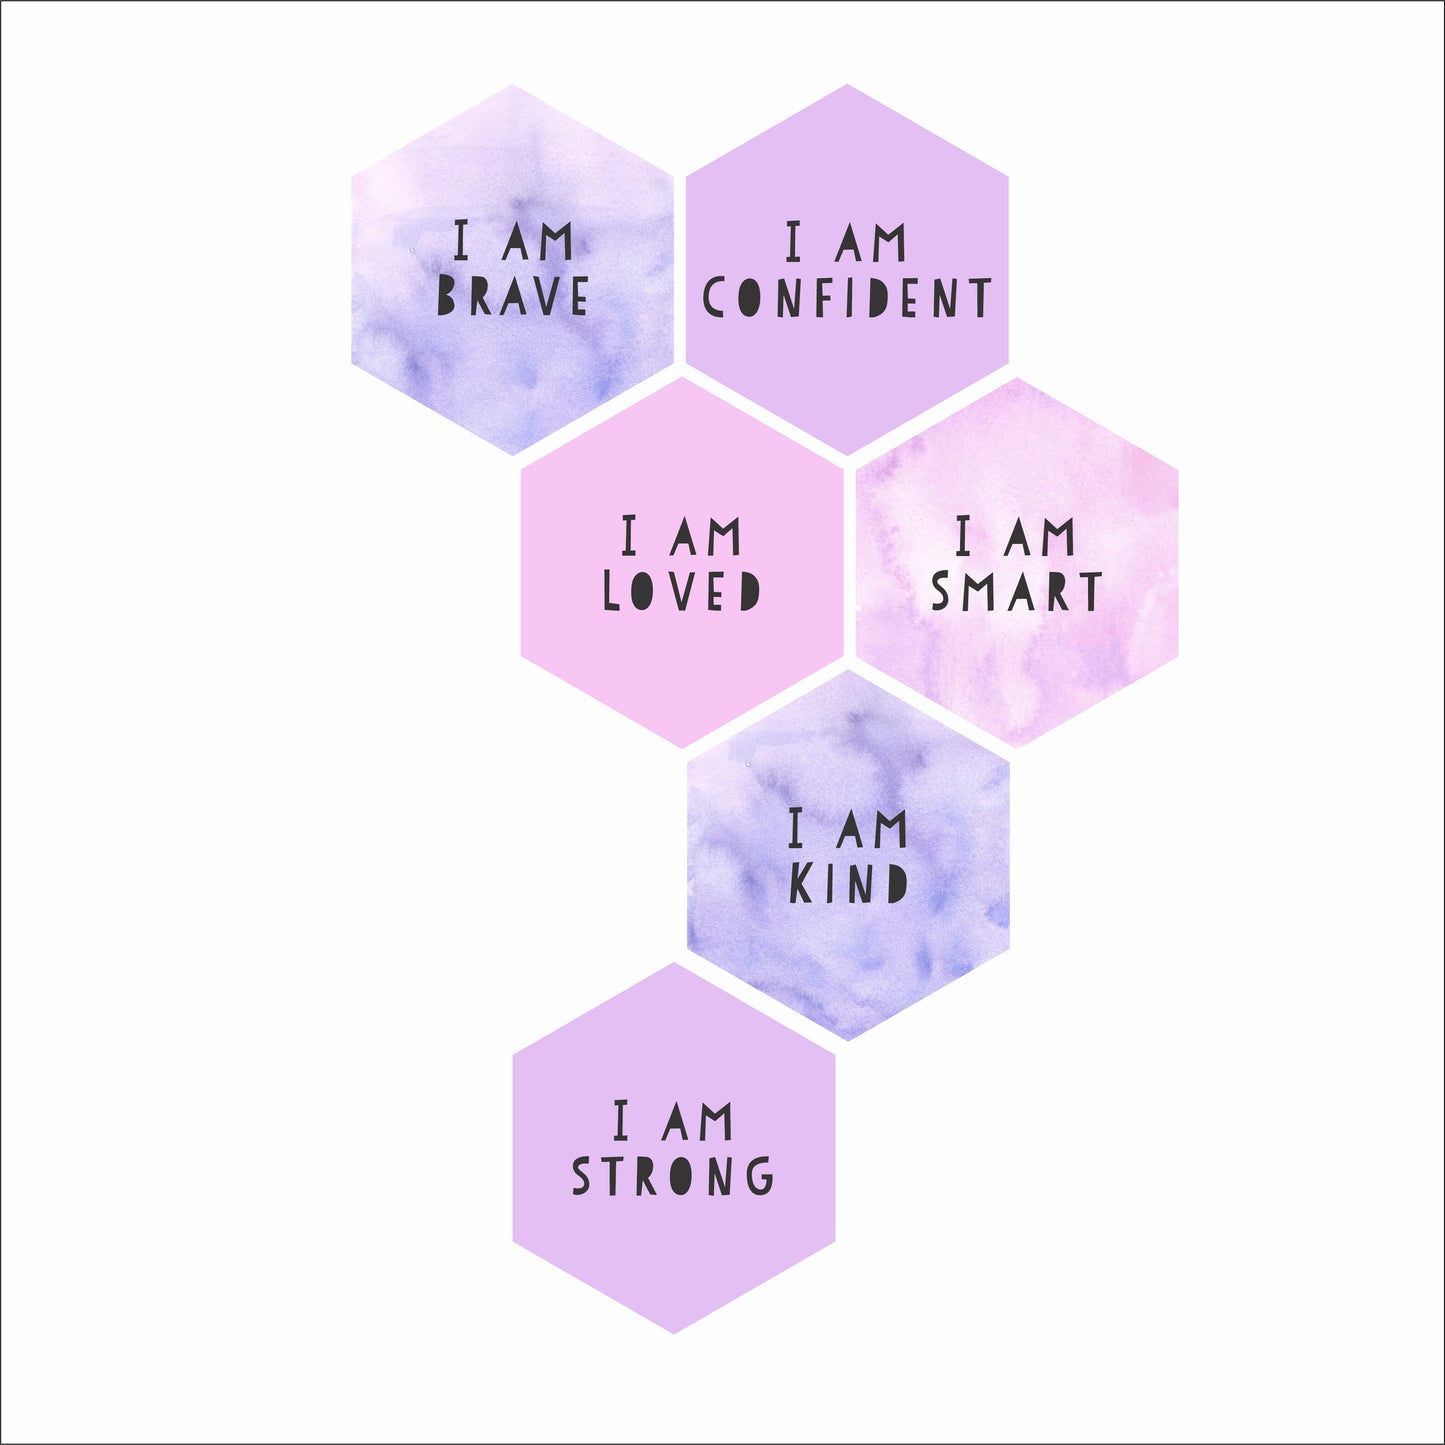 Hexagon affirmation movable wall decals - set of 6